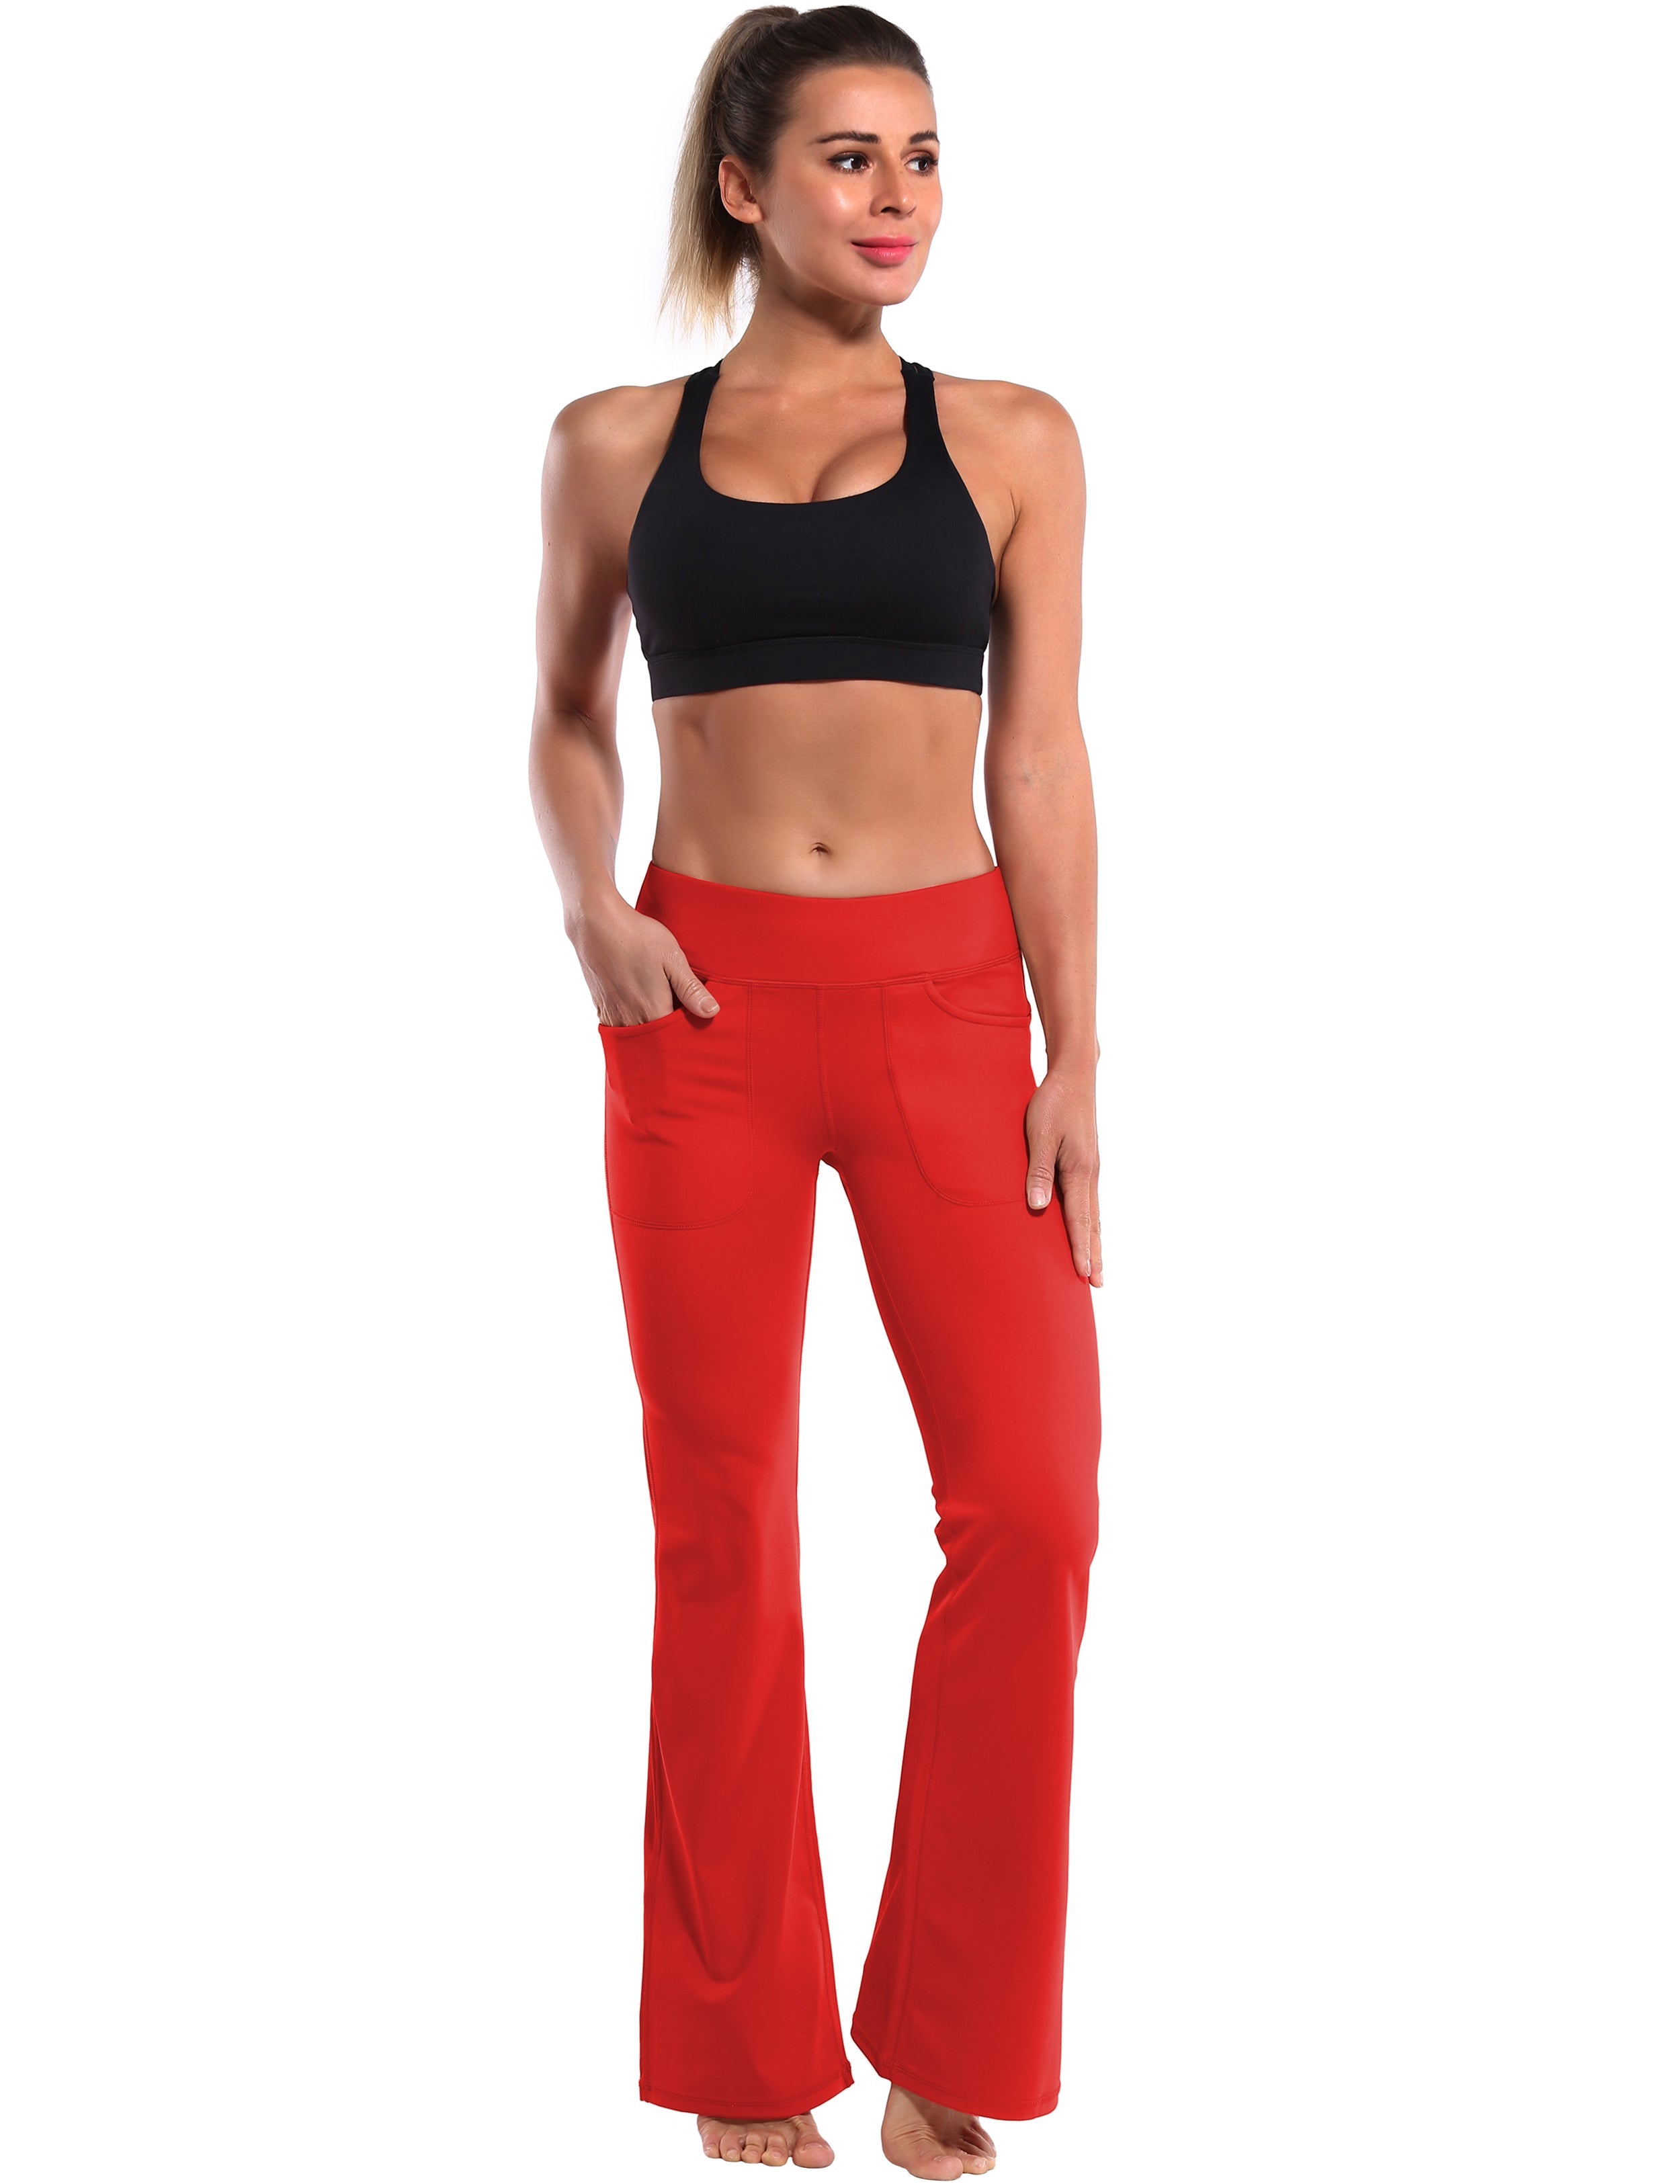 4 Pockets Bootcut Leggings scarlet 75%Nylon/25%Spandex Fabric doesn't attract lint easily 4-way stretch No see-through Moisture-wicking Inner pocket Four lengths